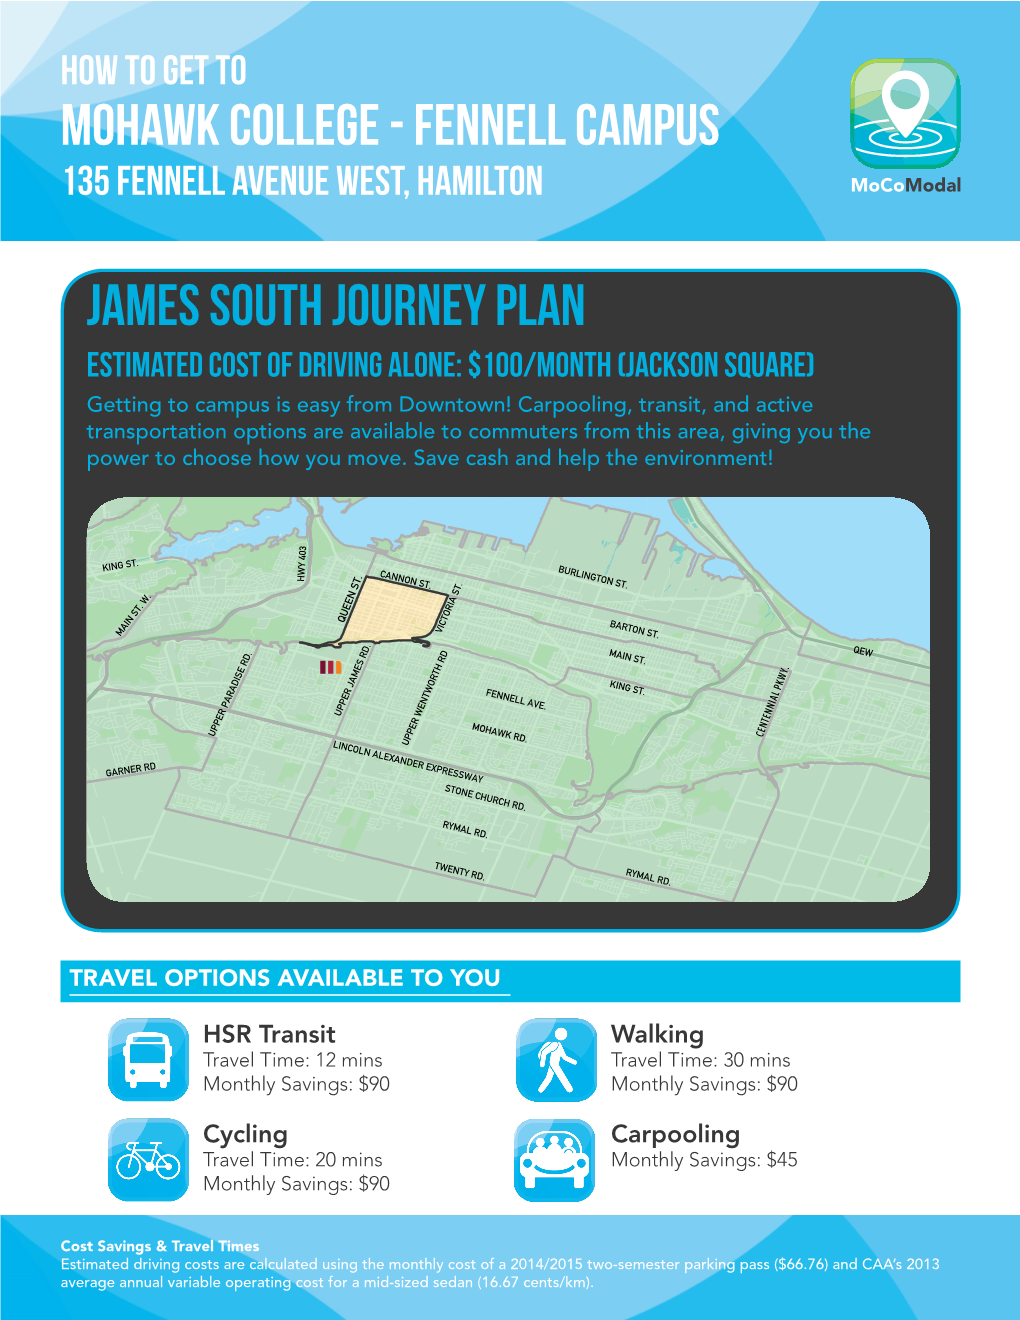 Fennell Campus James South Journey Plan